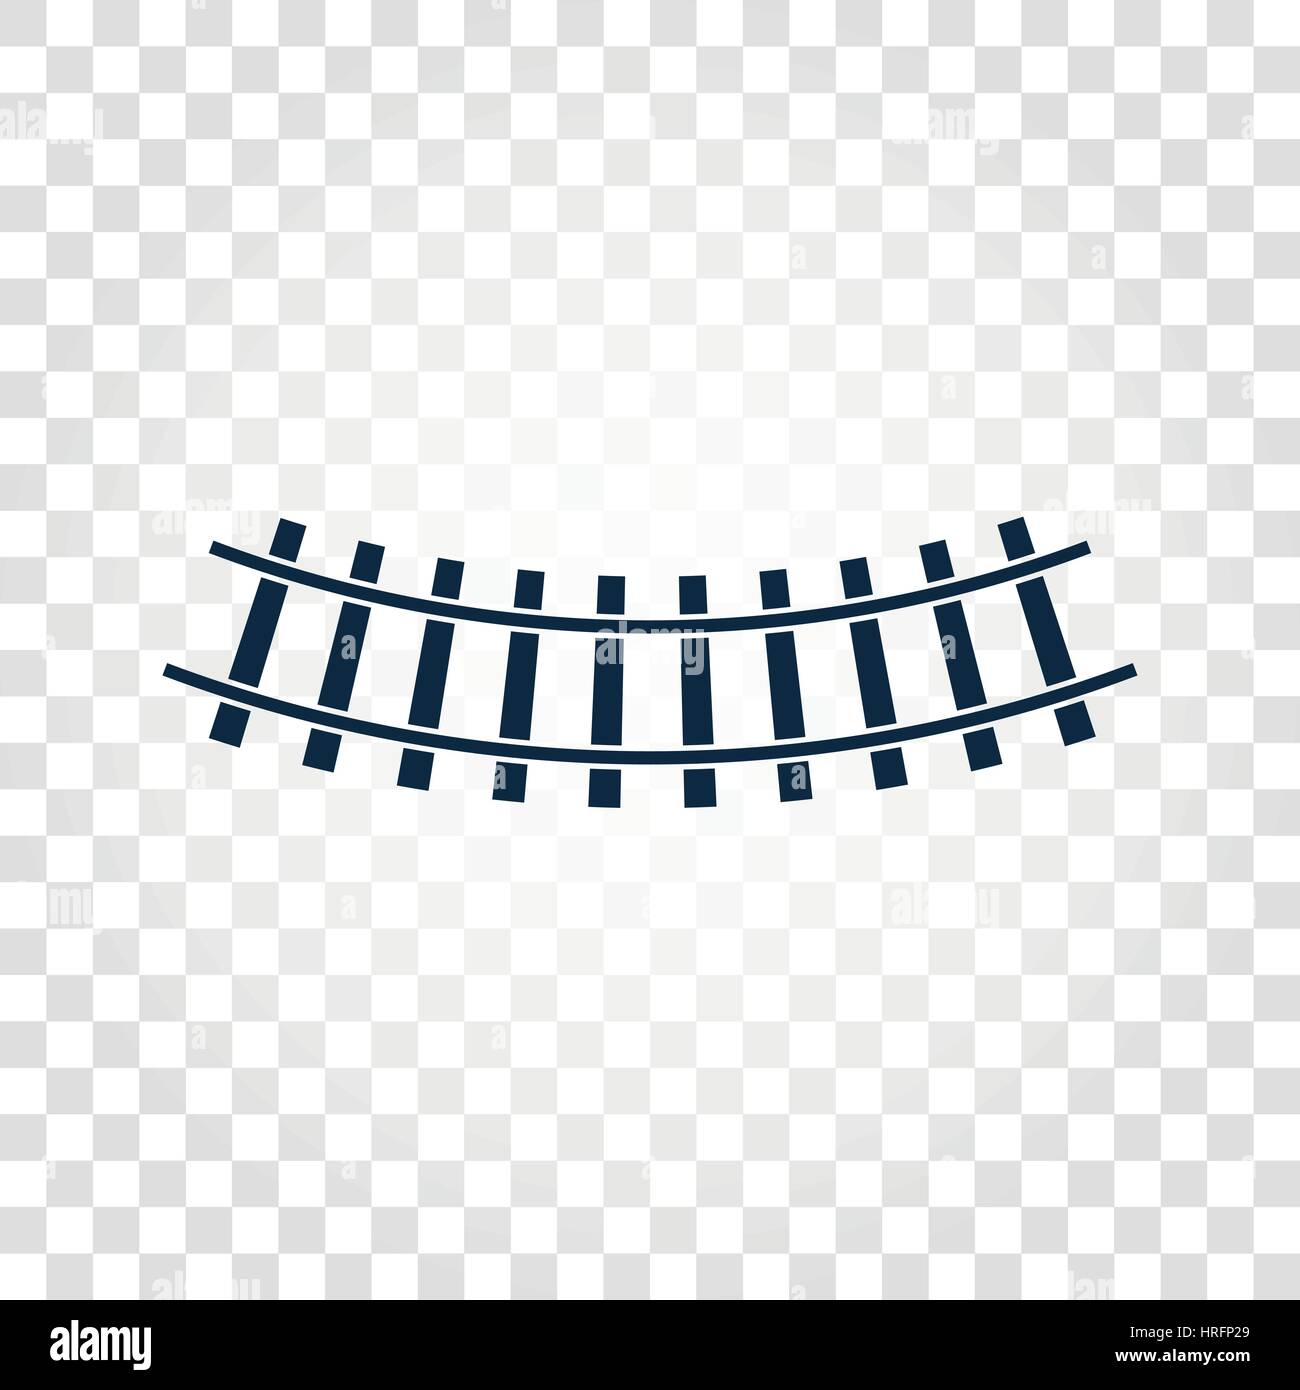 Isolated rails, railway top view, ladder elements vector illustrations on checkered gradient background Stock Vector